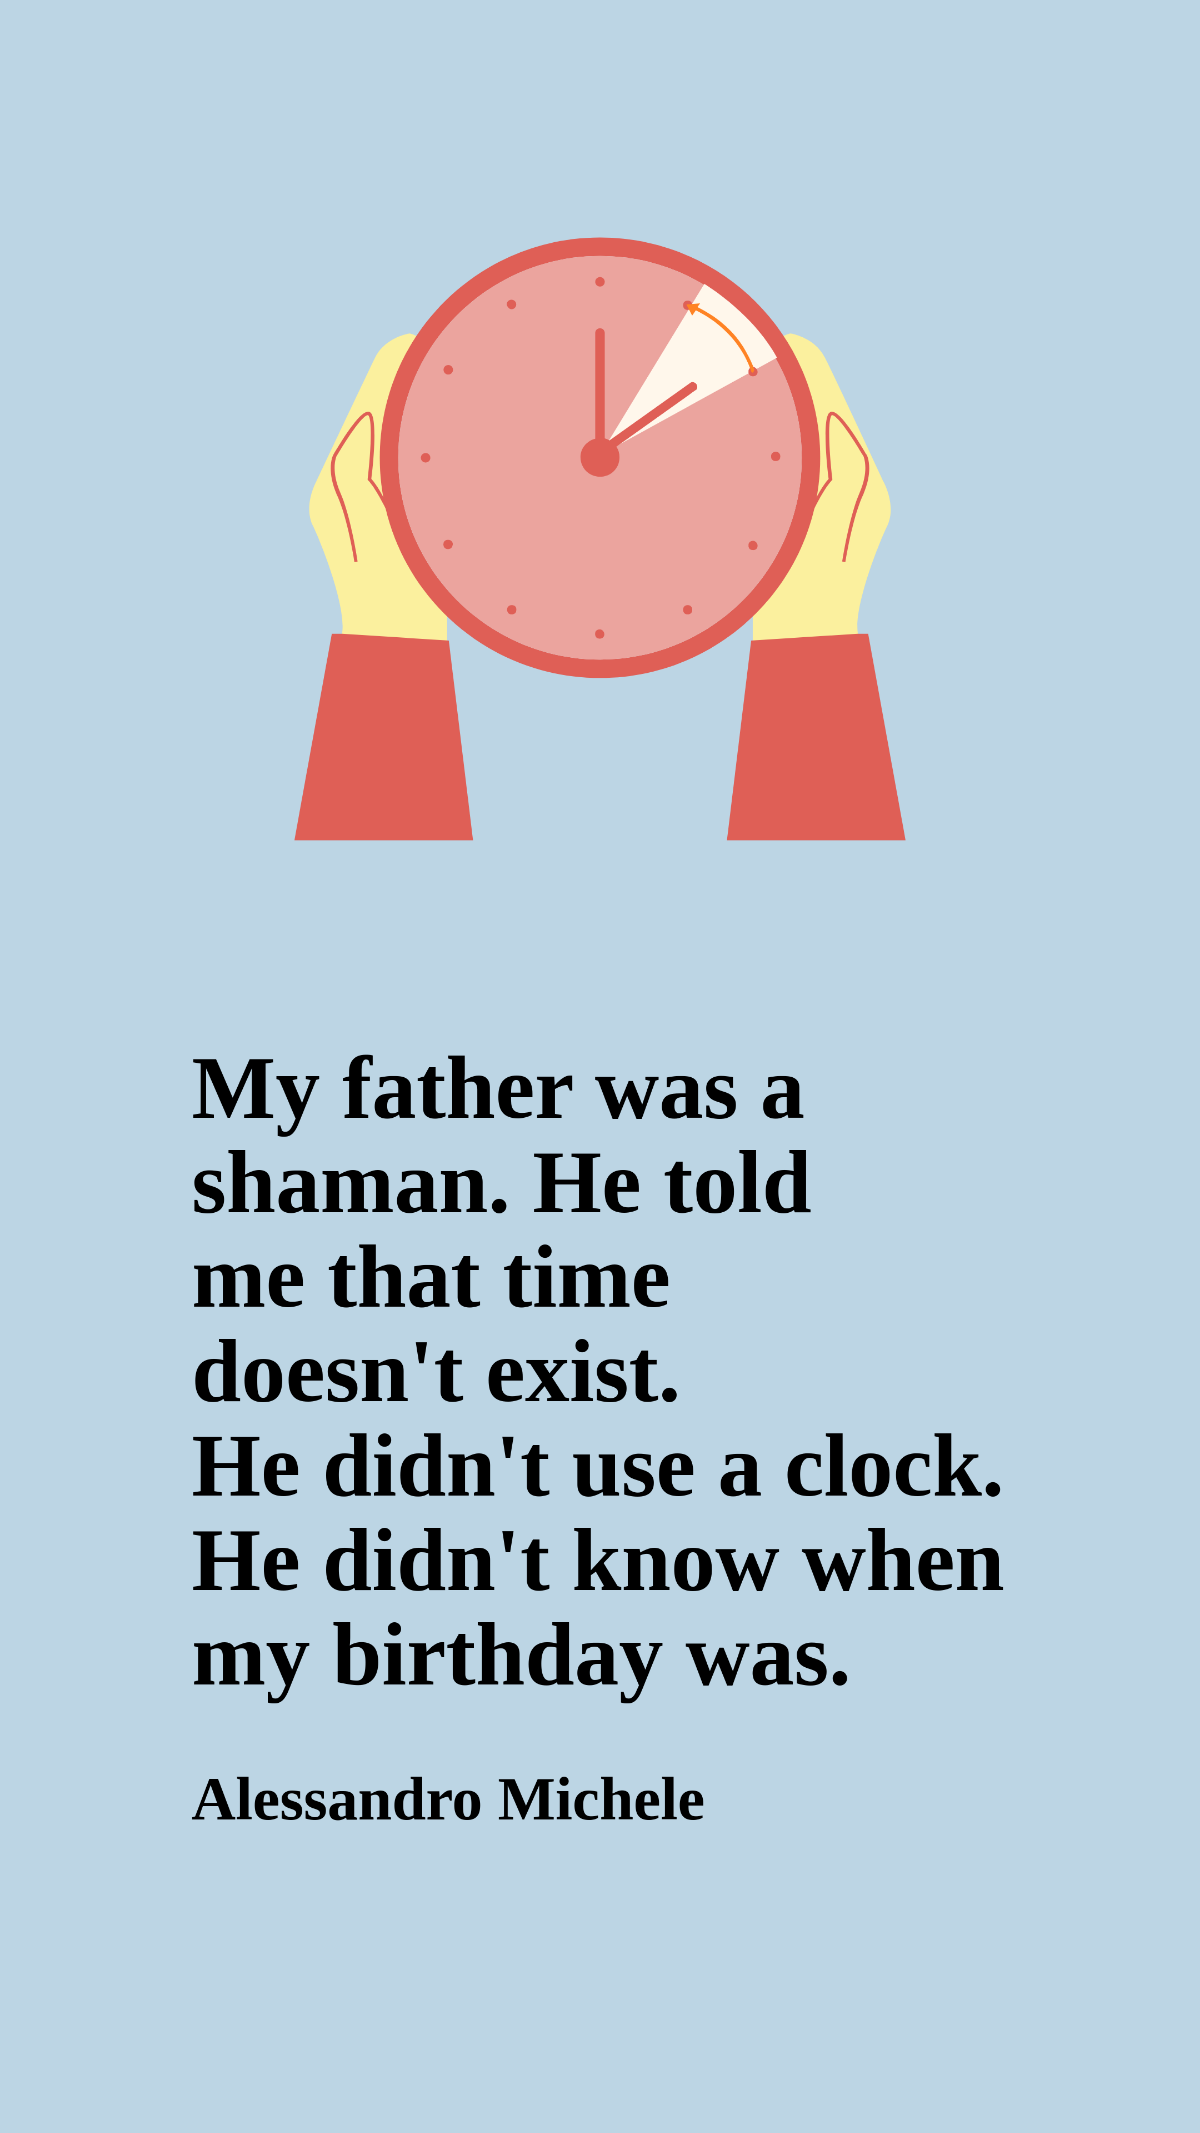 Free Alessandro Michele - My father was a shaman. He told me that time doesn't exist. He didn't use a clock. He didn't know when my birthday was. Template